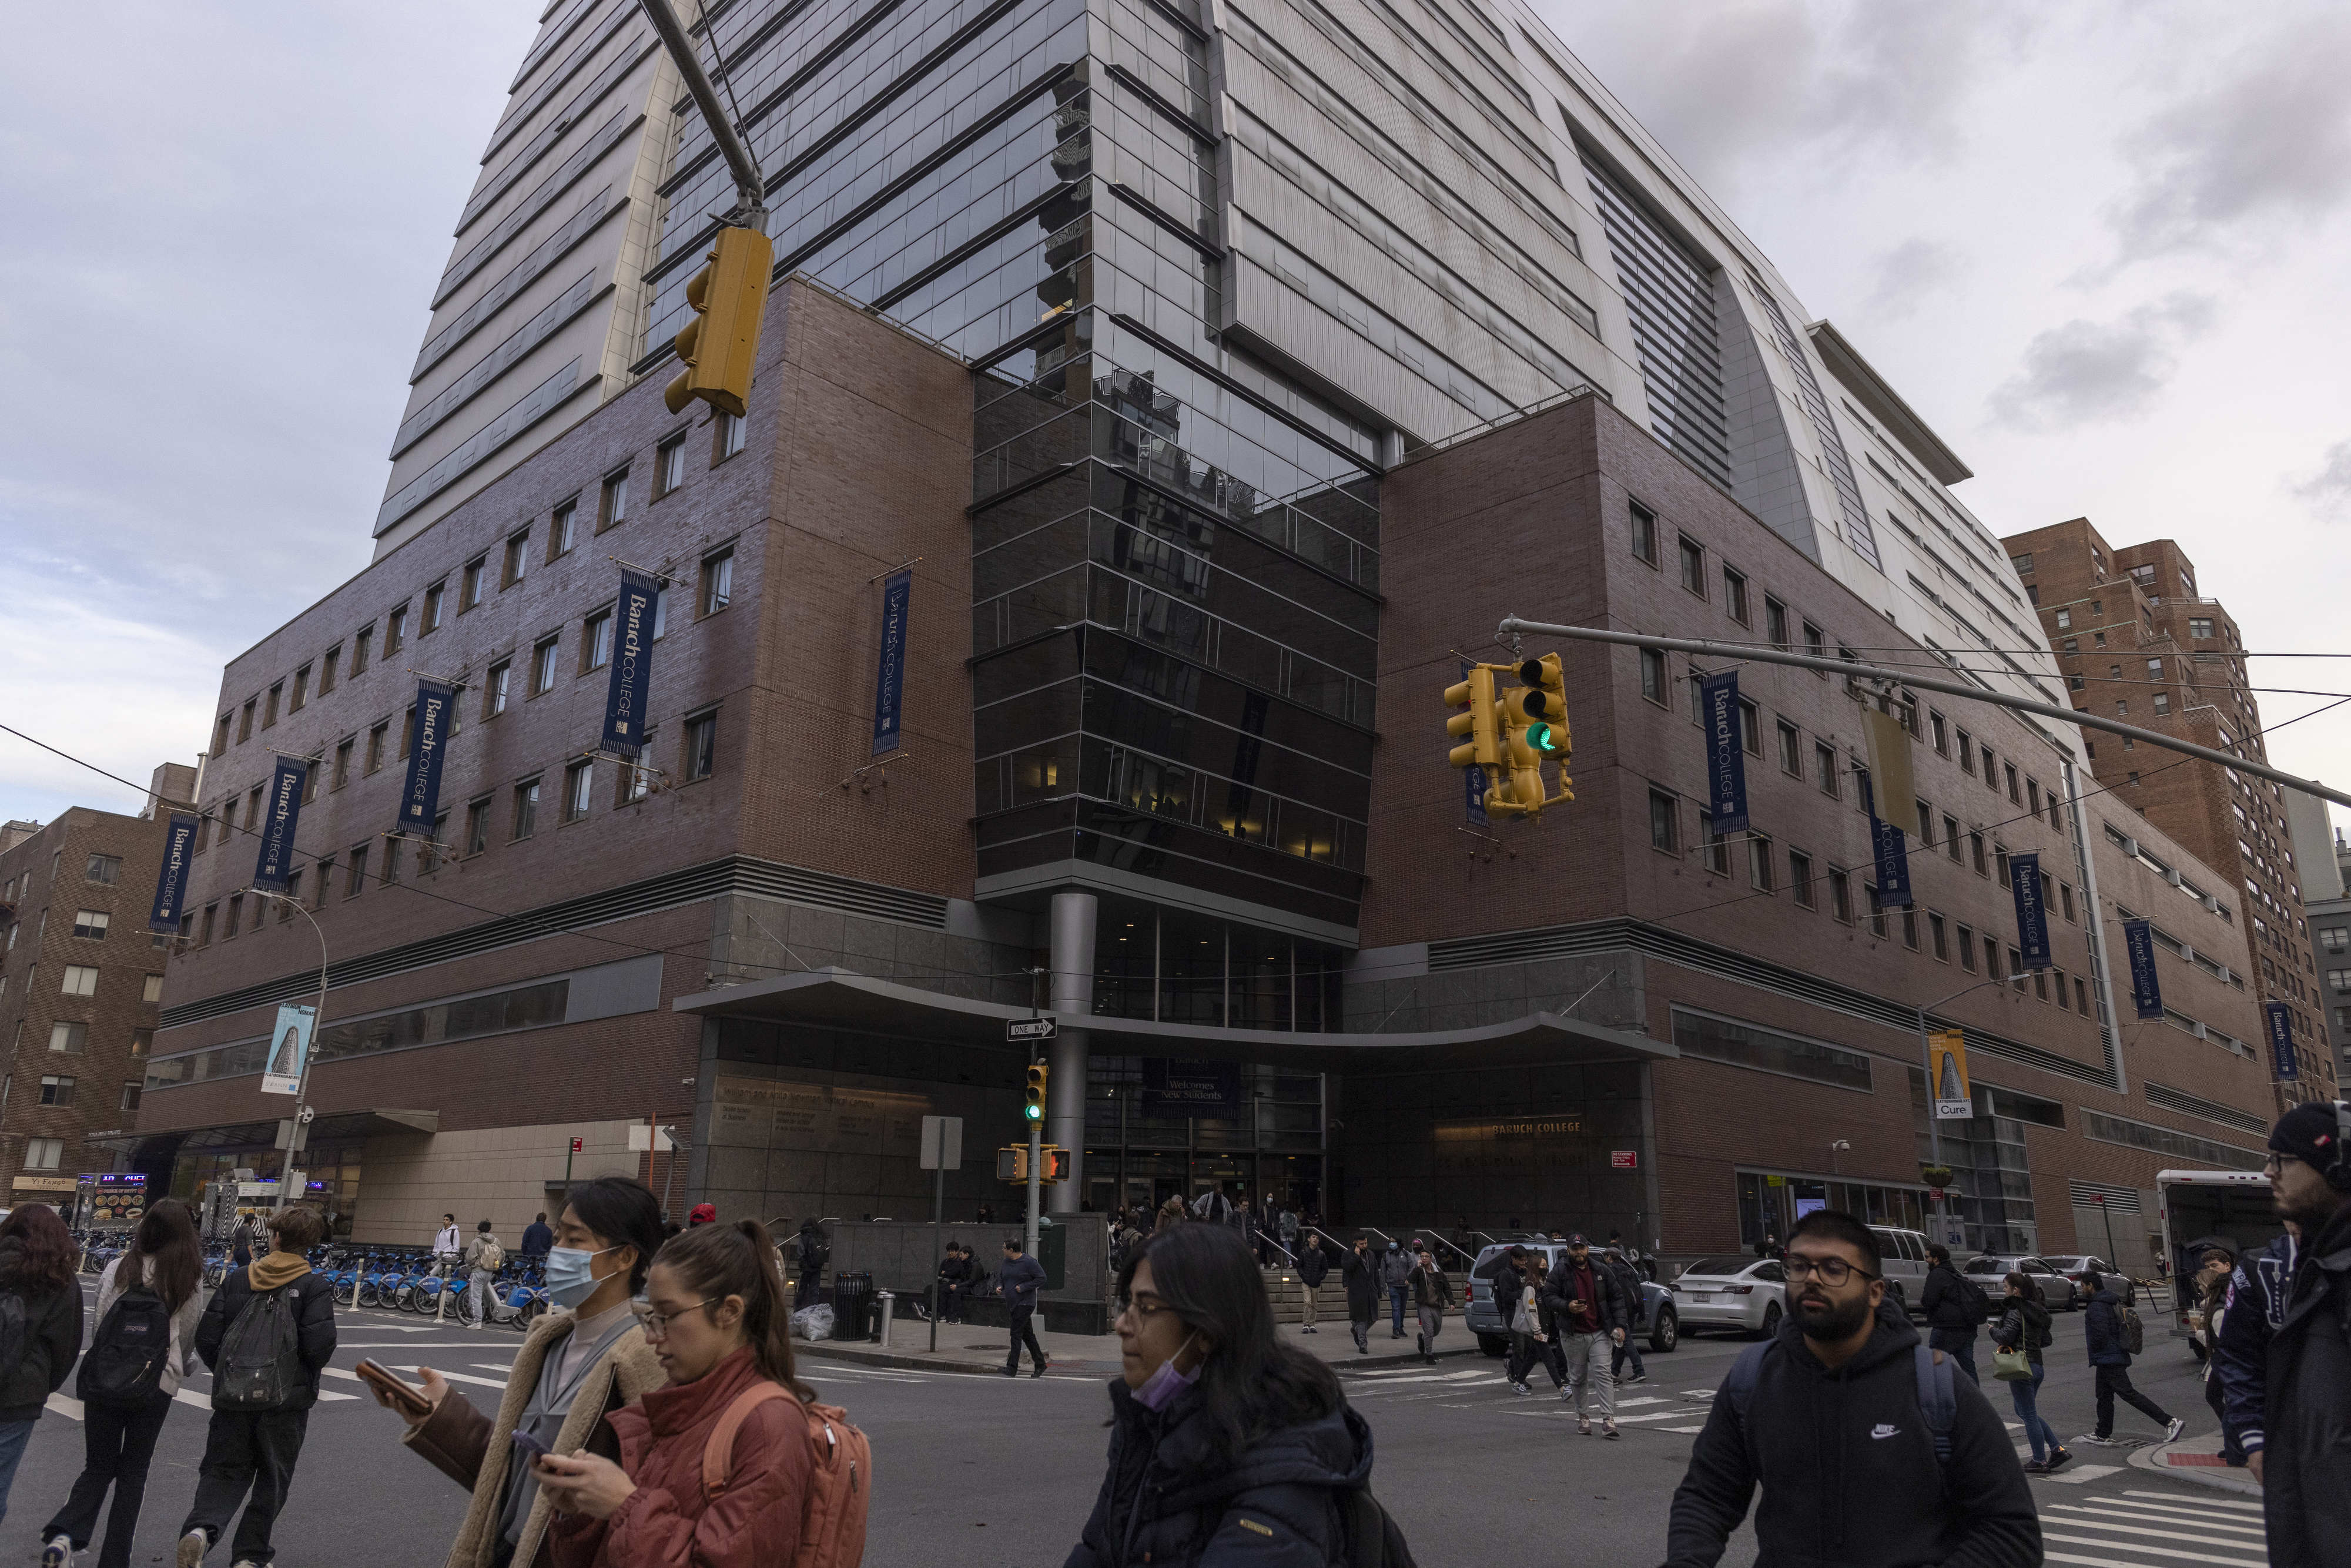 Baruch College campus in New York.